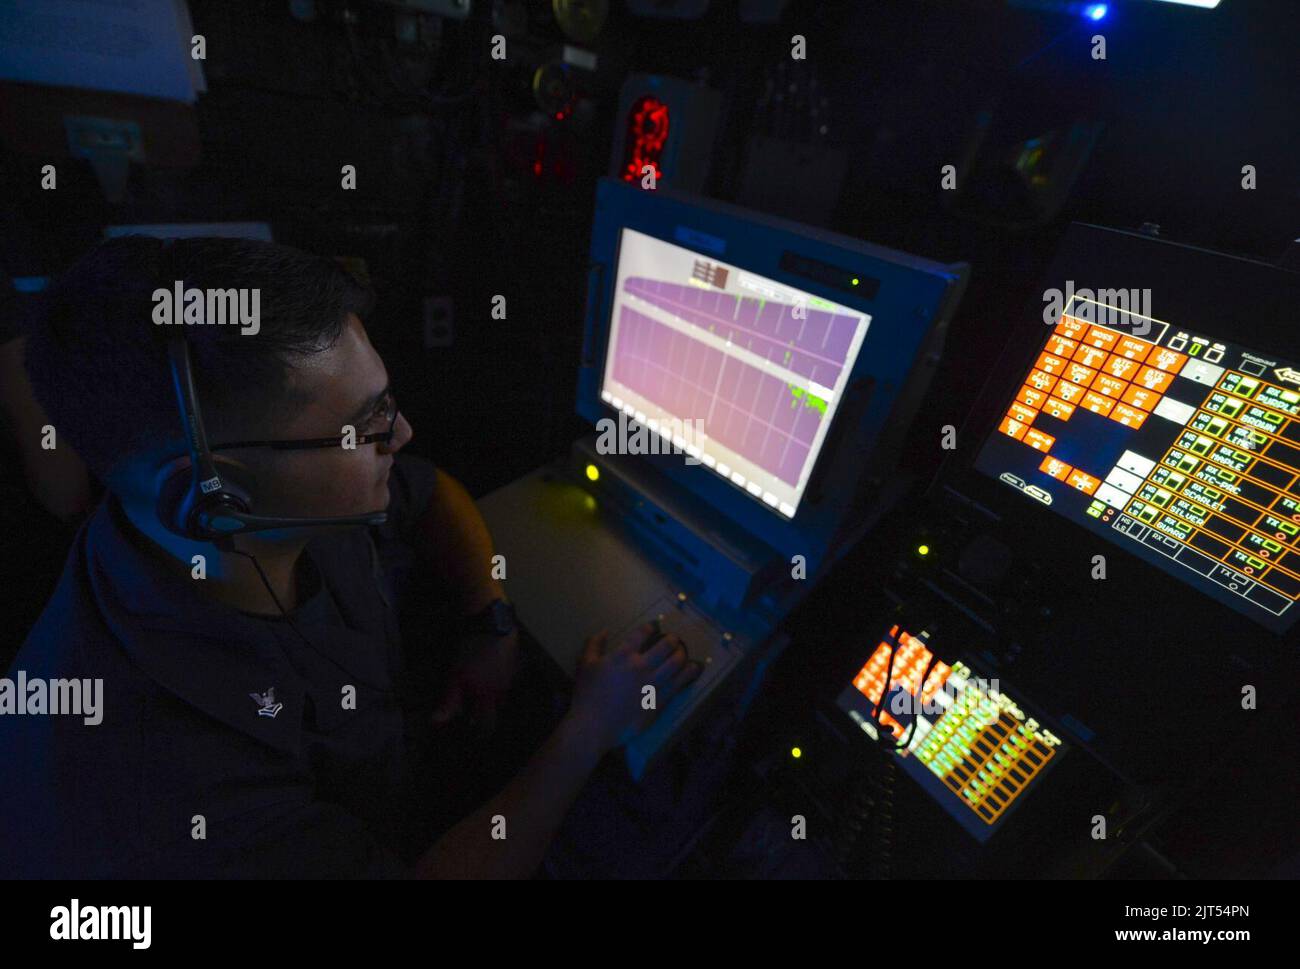 U.S. Navy Air Traffic Controller 2nd Class monitors air operations in the amphibious air traffic control center aboard the amphibious assault ship USS Bataan (LHD 5) March 23, 2014, in 140323 Stock Photo